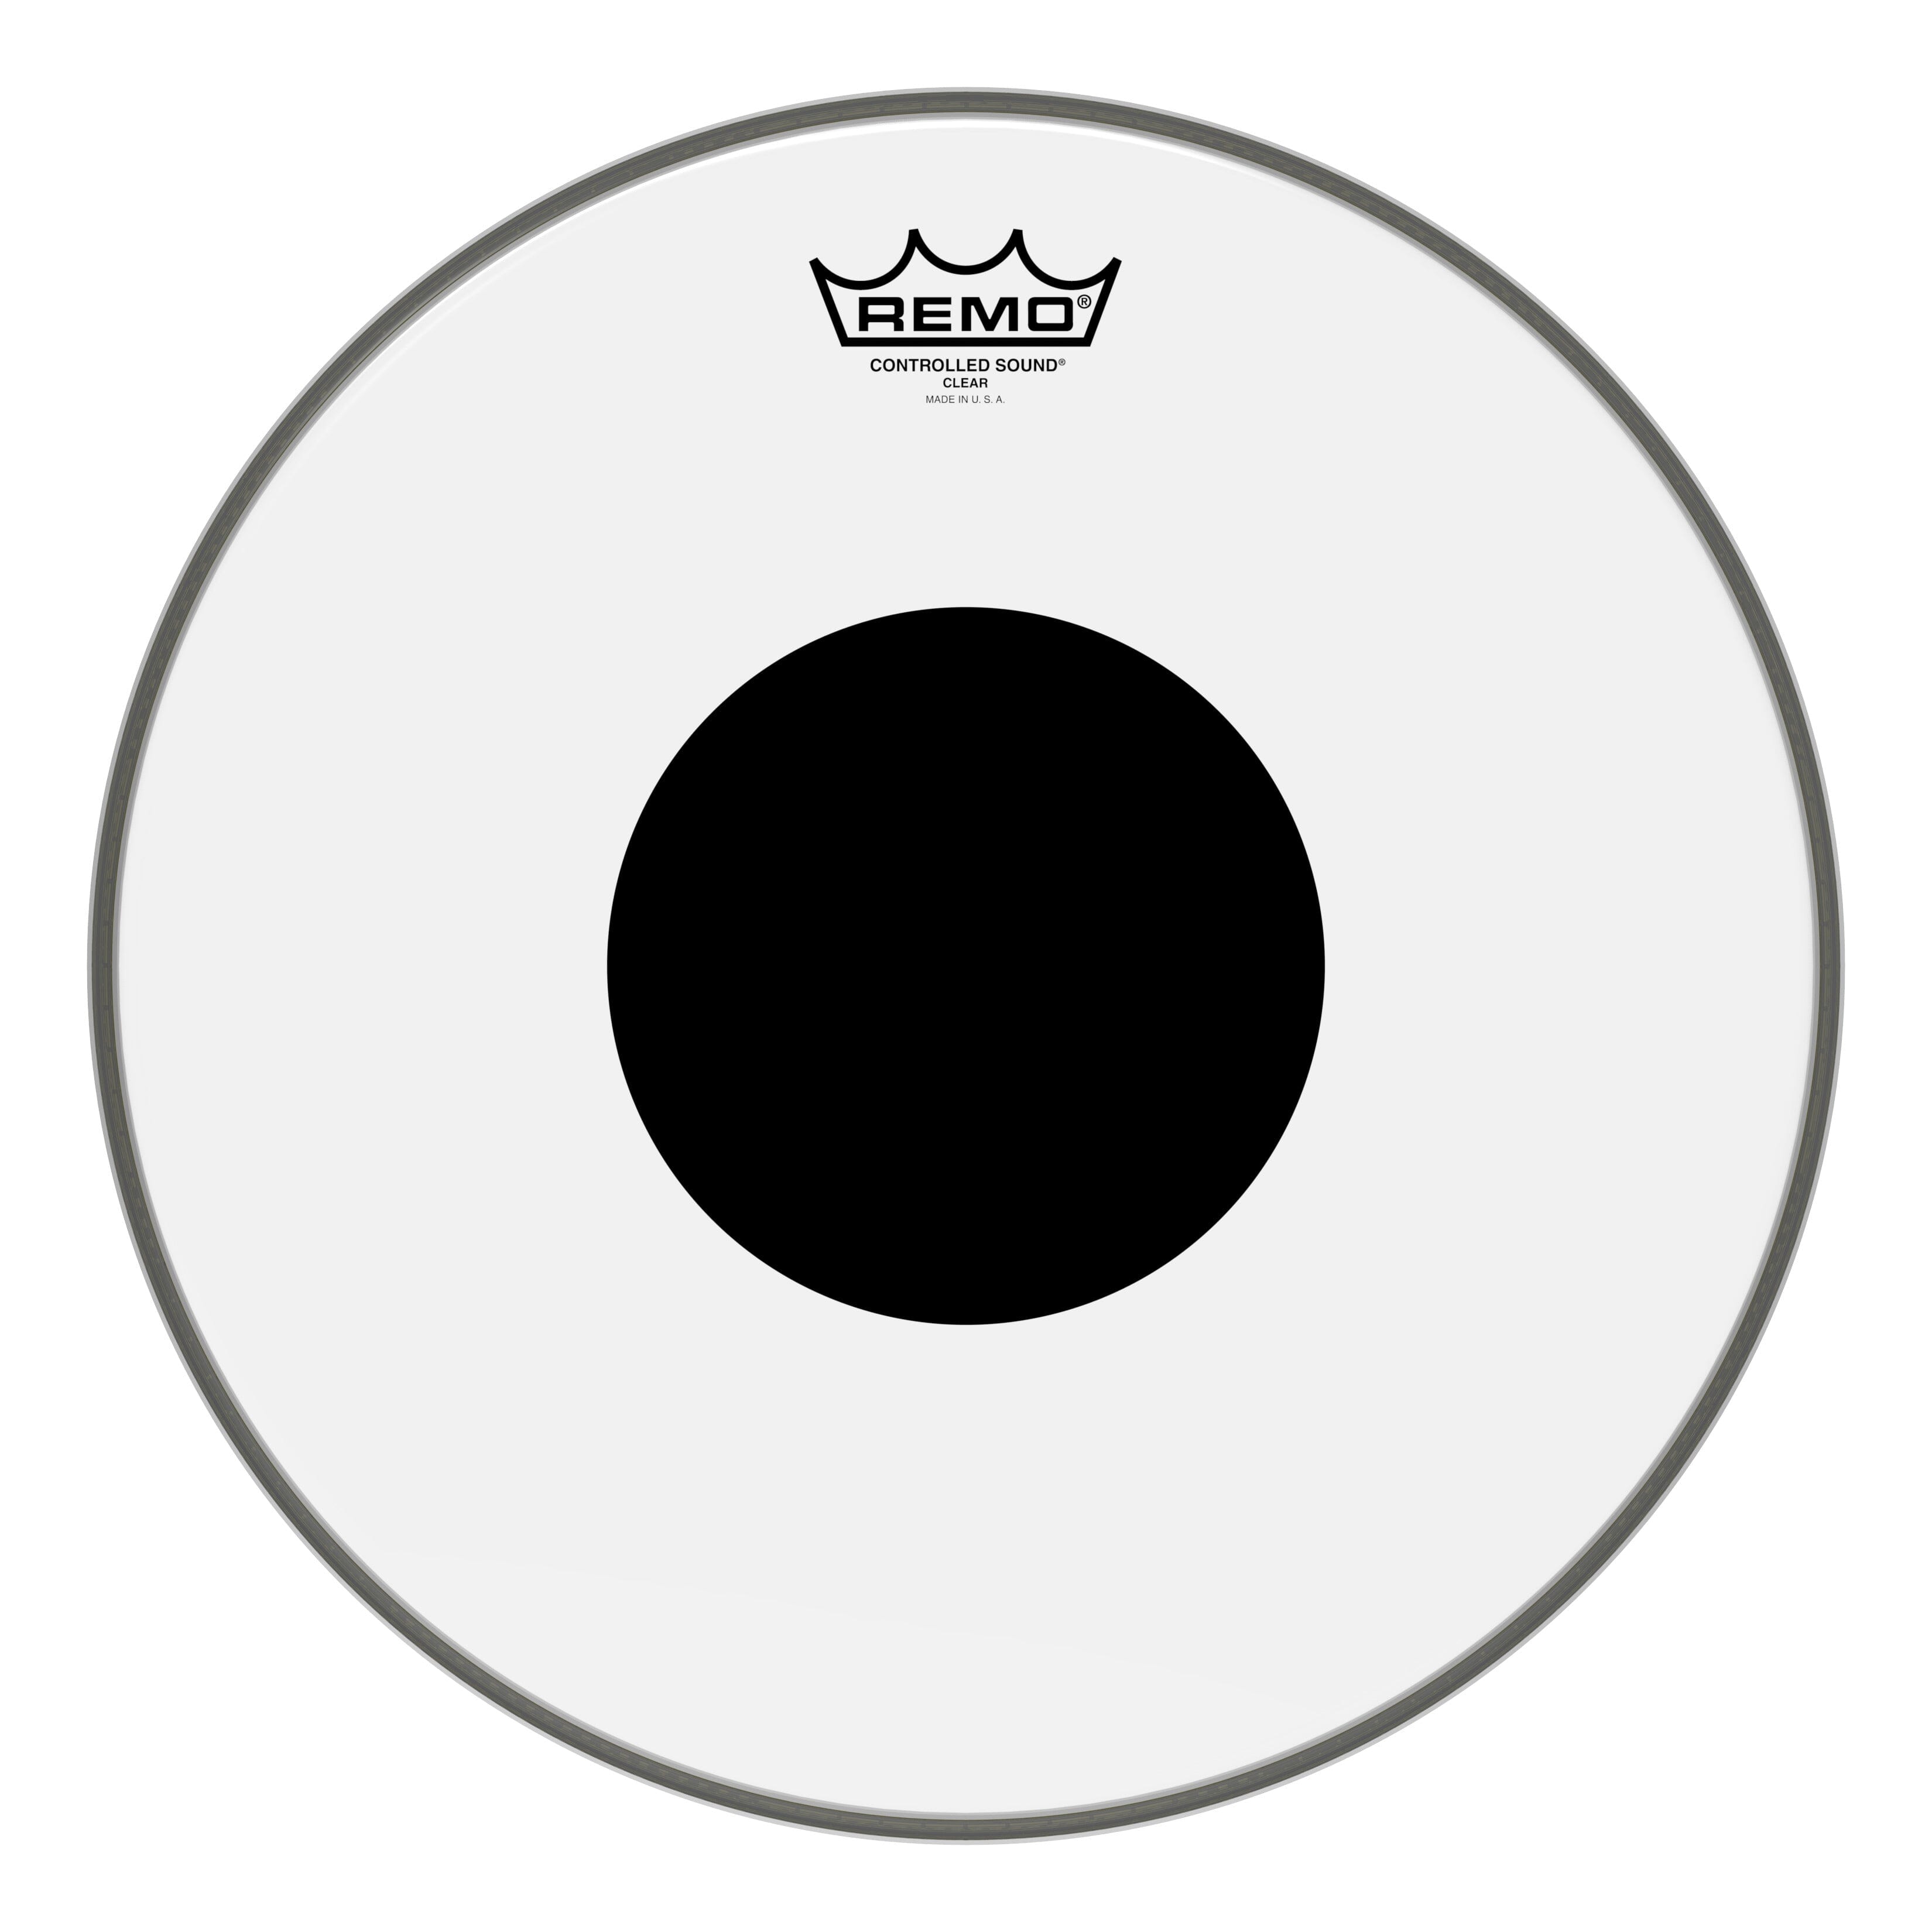 Remo 14" Controlled Sound Clear Batter Head W/Top Dot (CS-0314-10) Drum Heads Remo 